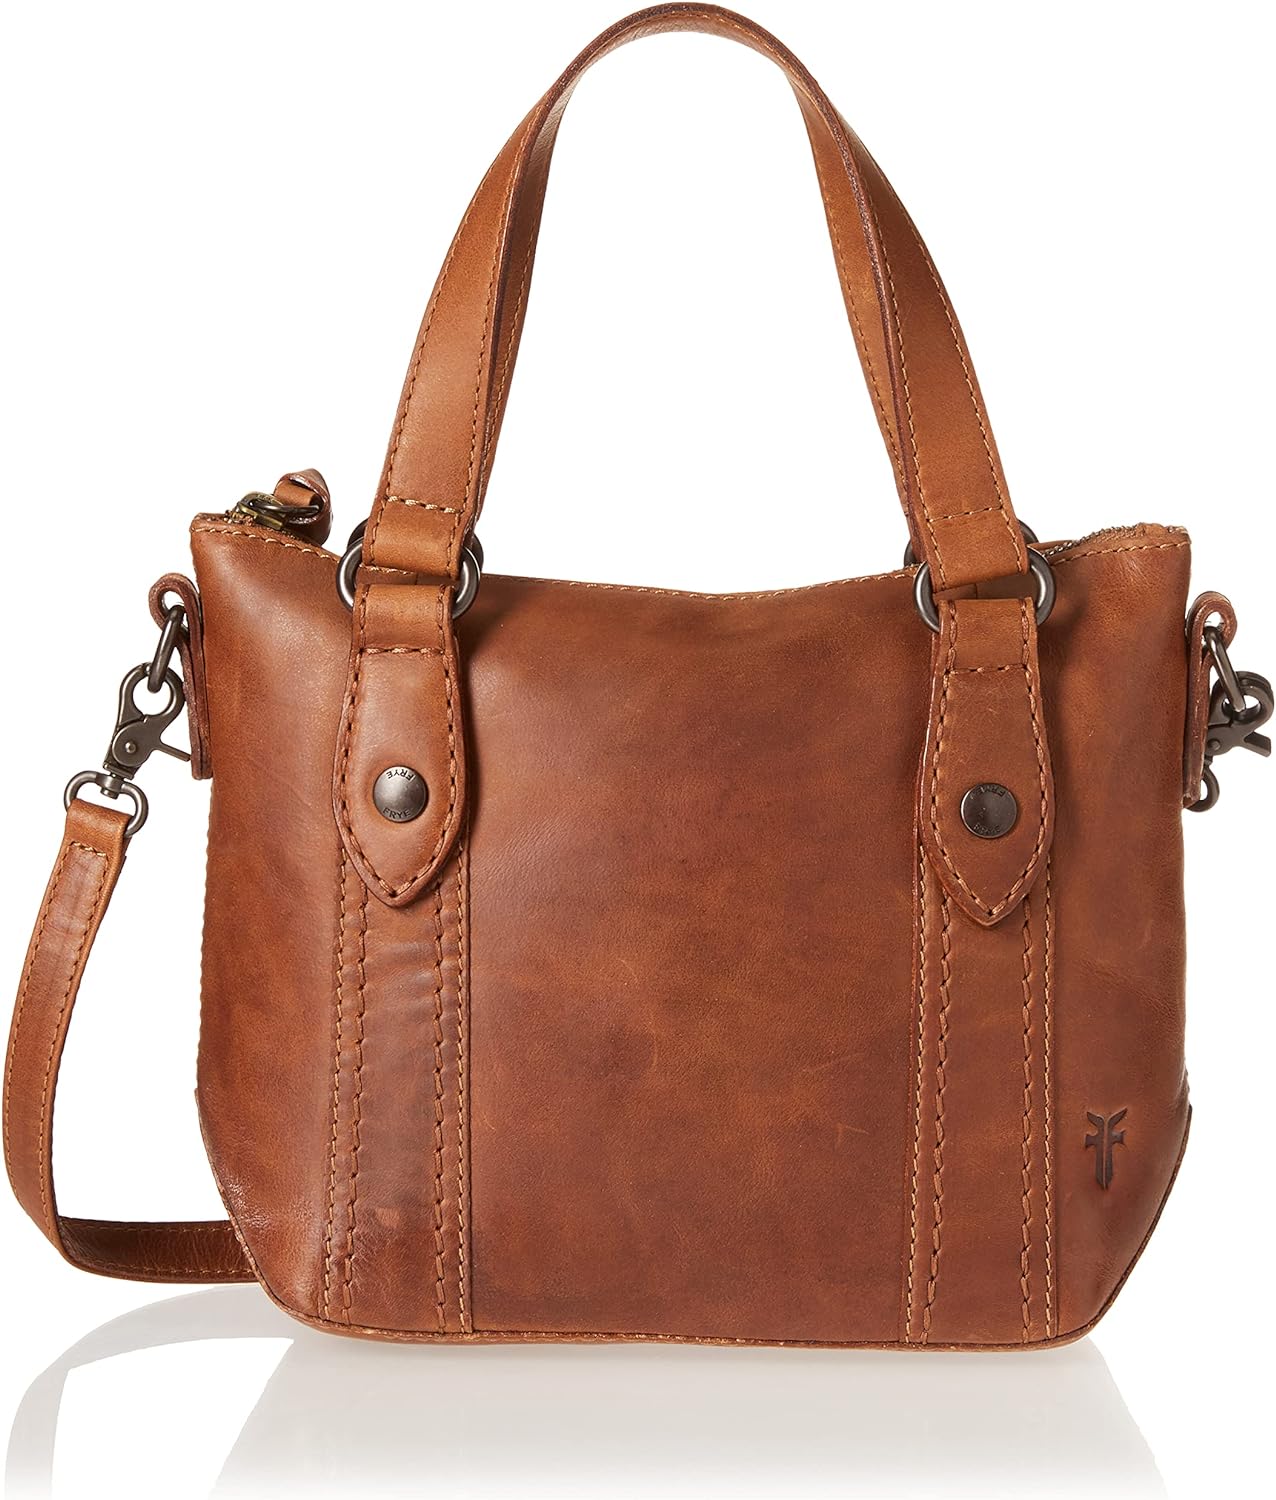 FRYE Melissa Small Tote Crossbody Leather Bag